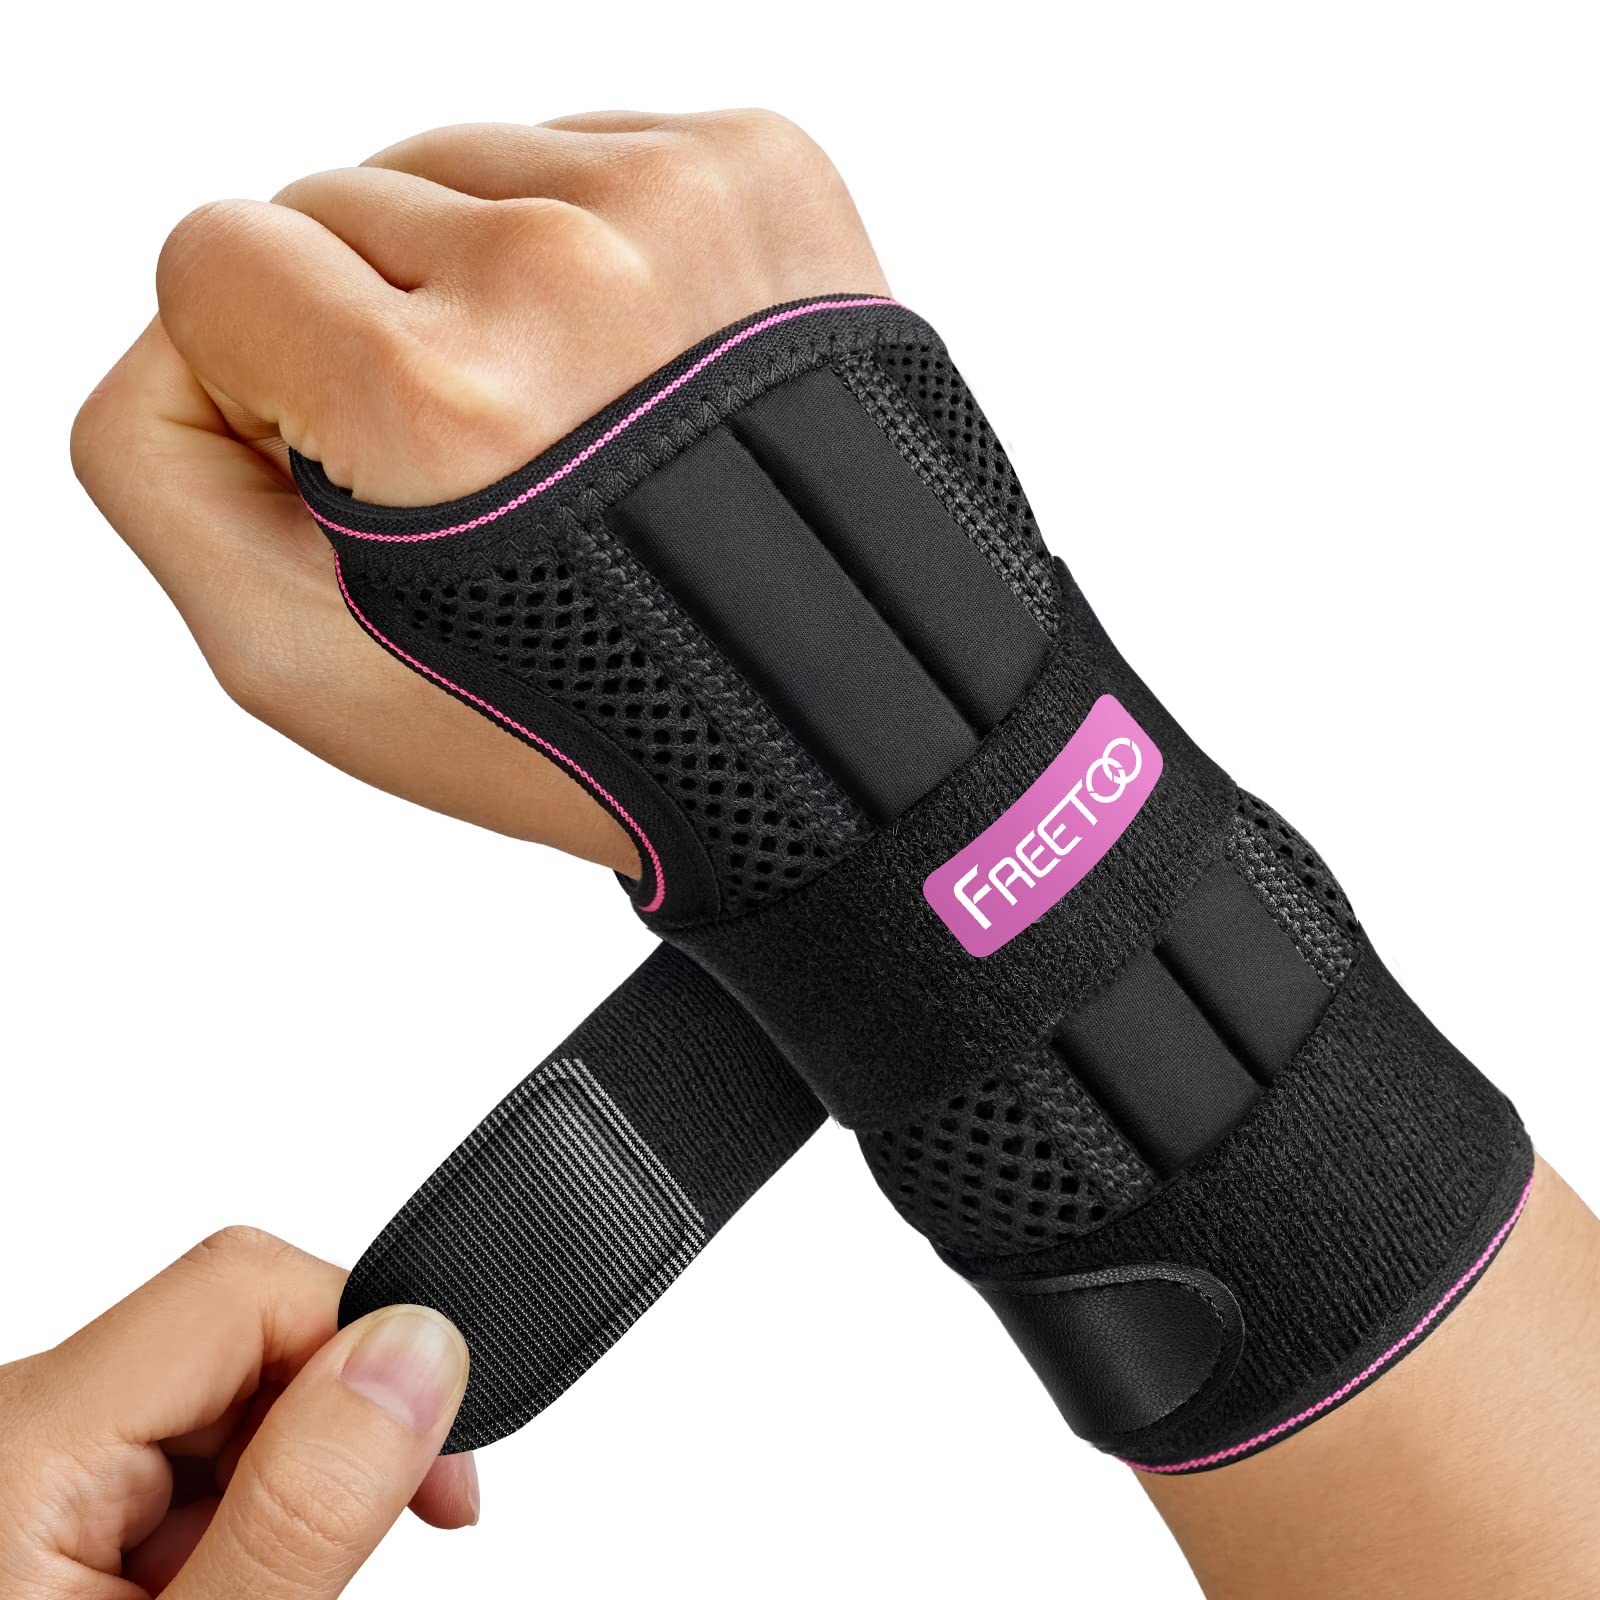 Abaadlw Wrist Brace for Carpal Tunnel, Adjustable Night Wrist sleep Support  for Tendonitis Arthritis Pain Relief, Compression Carpal Tunnel Relief Hand  Brace for Men Women price in Saudi Arabia